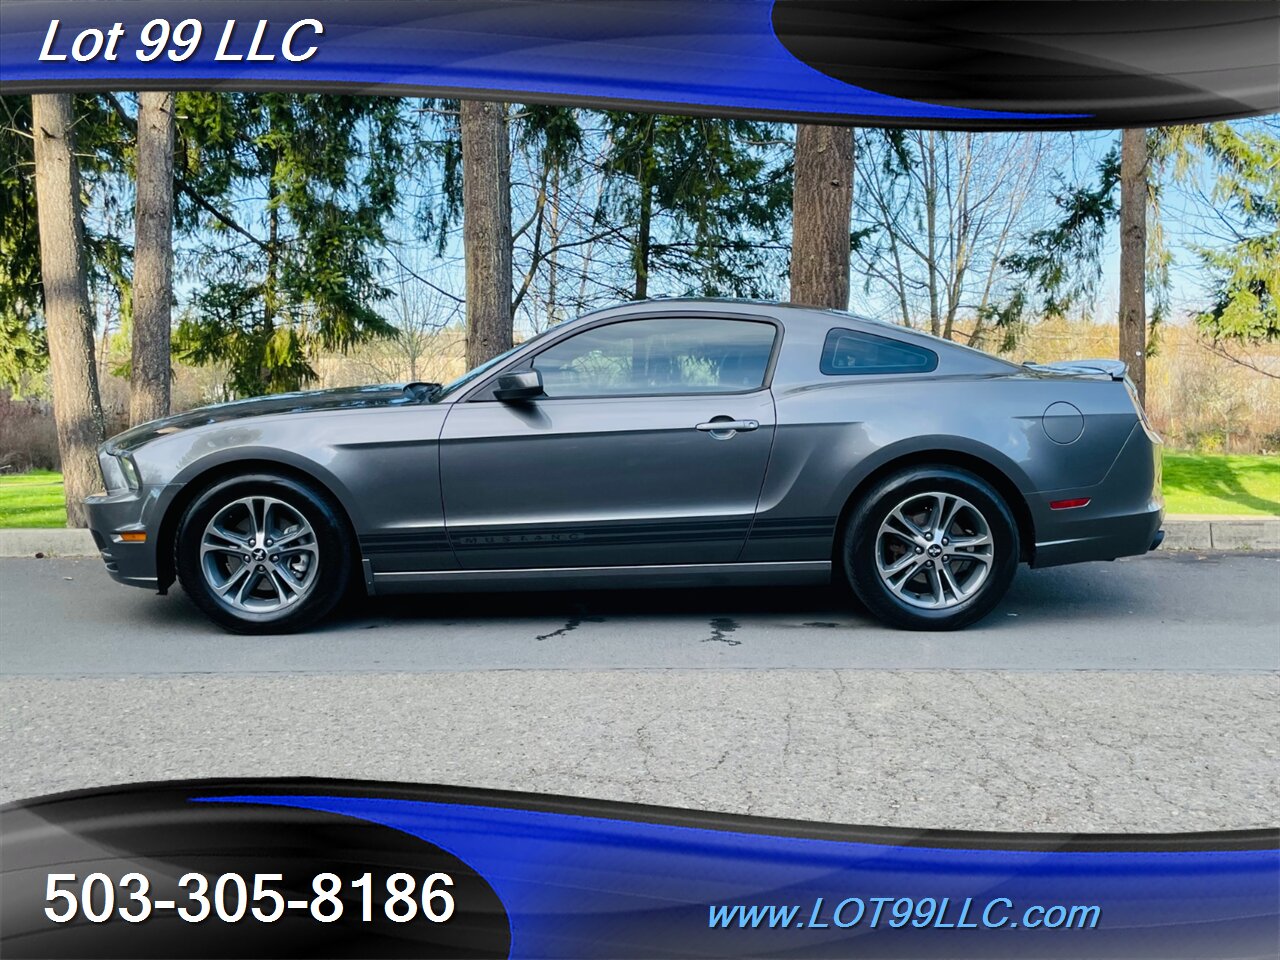 2014 Ford Mustang V6  3.7L V6 305hp  145k Miles Auto, 6-Spd SelectSh   - Photo 1 - Milwaukie, OR 97267